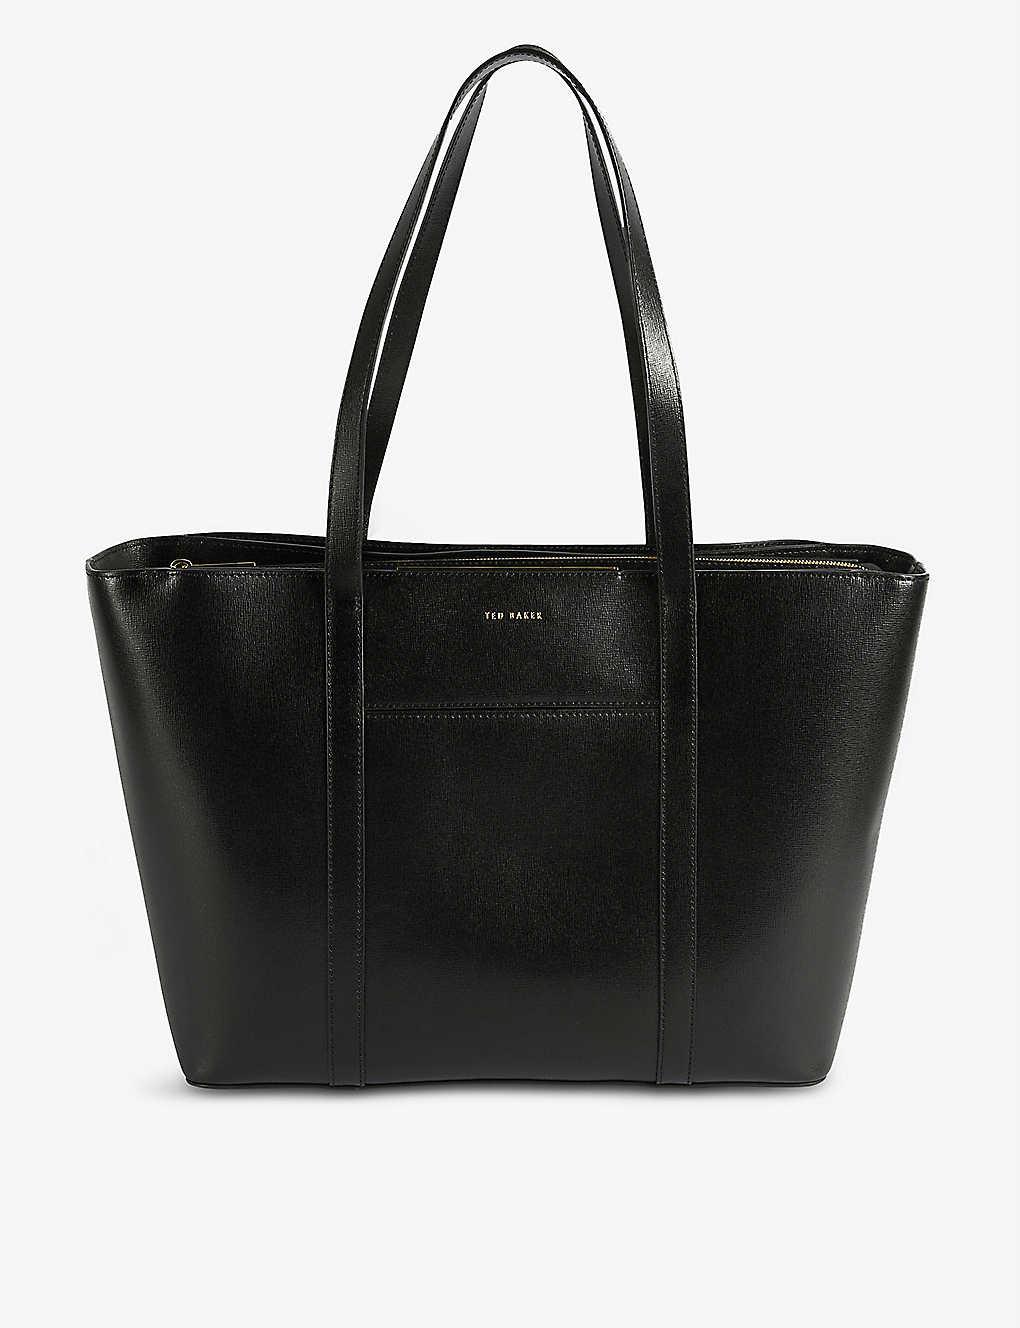 Tuscany Leather TLBag Saffiano leather tote Black : Clothing, Shoes &  Jewelry 